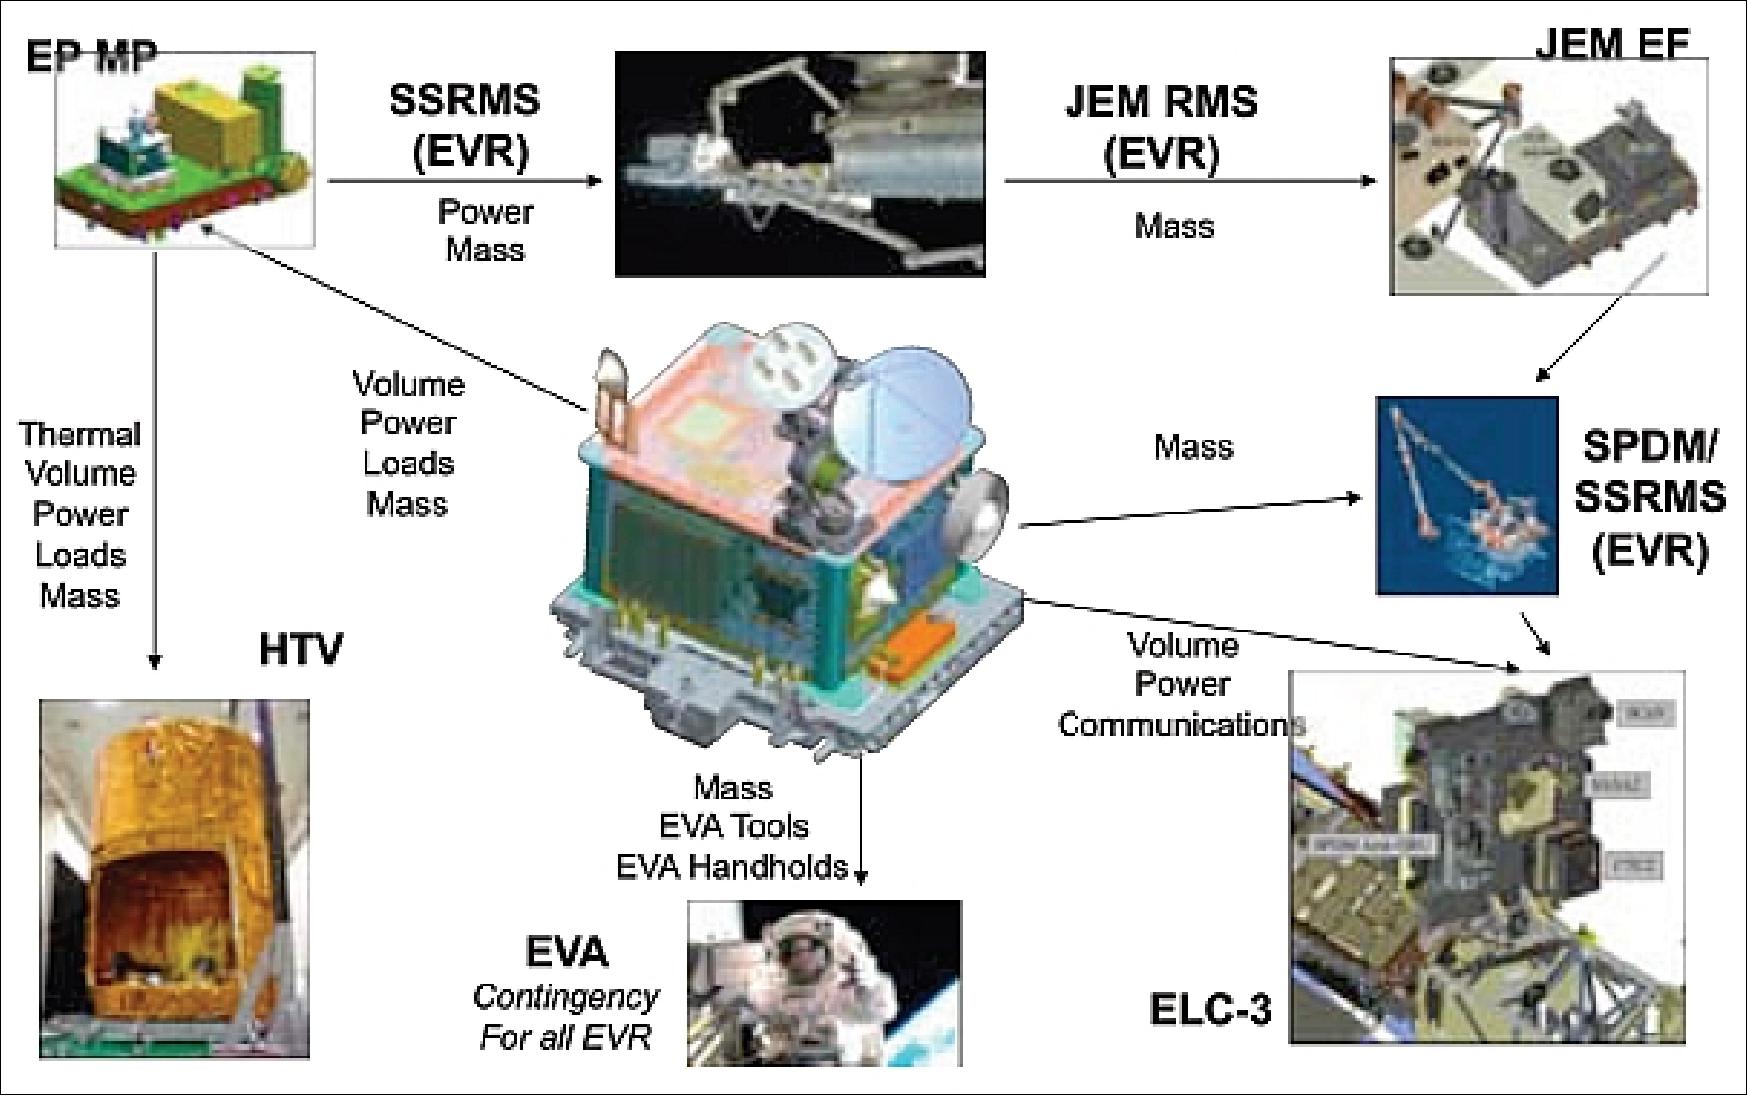 Figure 2: ISS and HTV carrier interfaces (image credit: NASA)